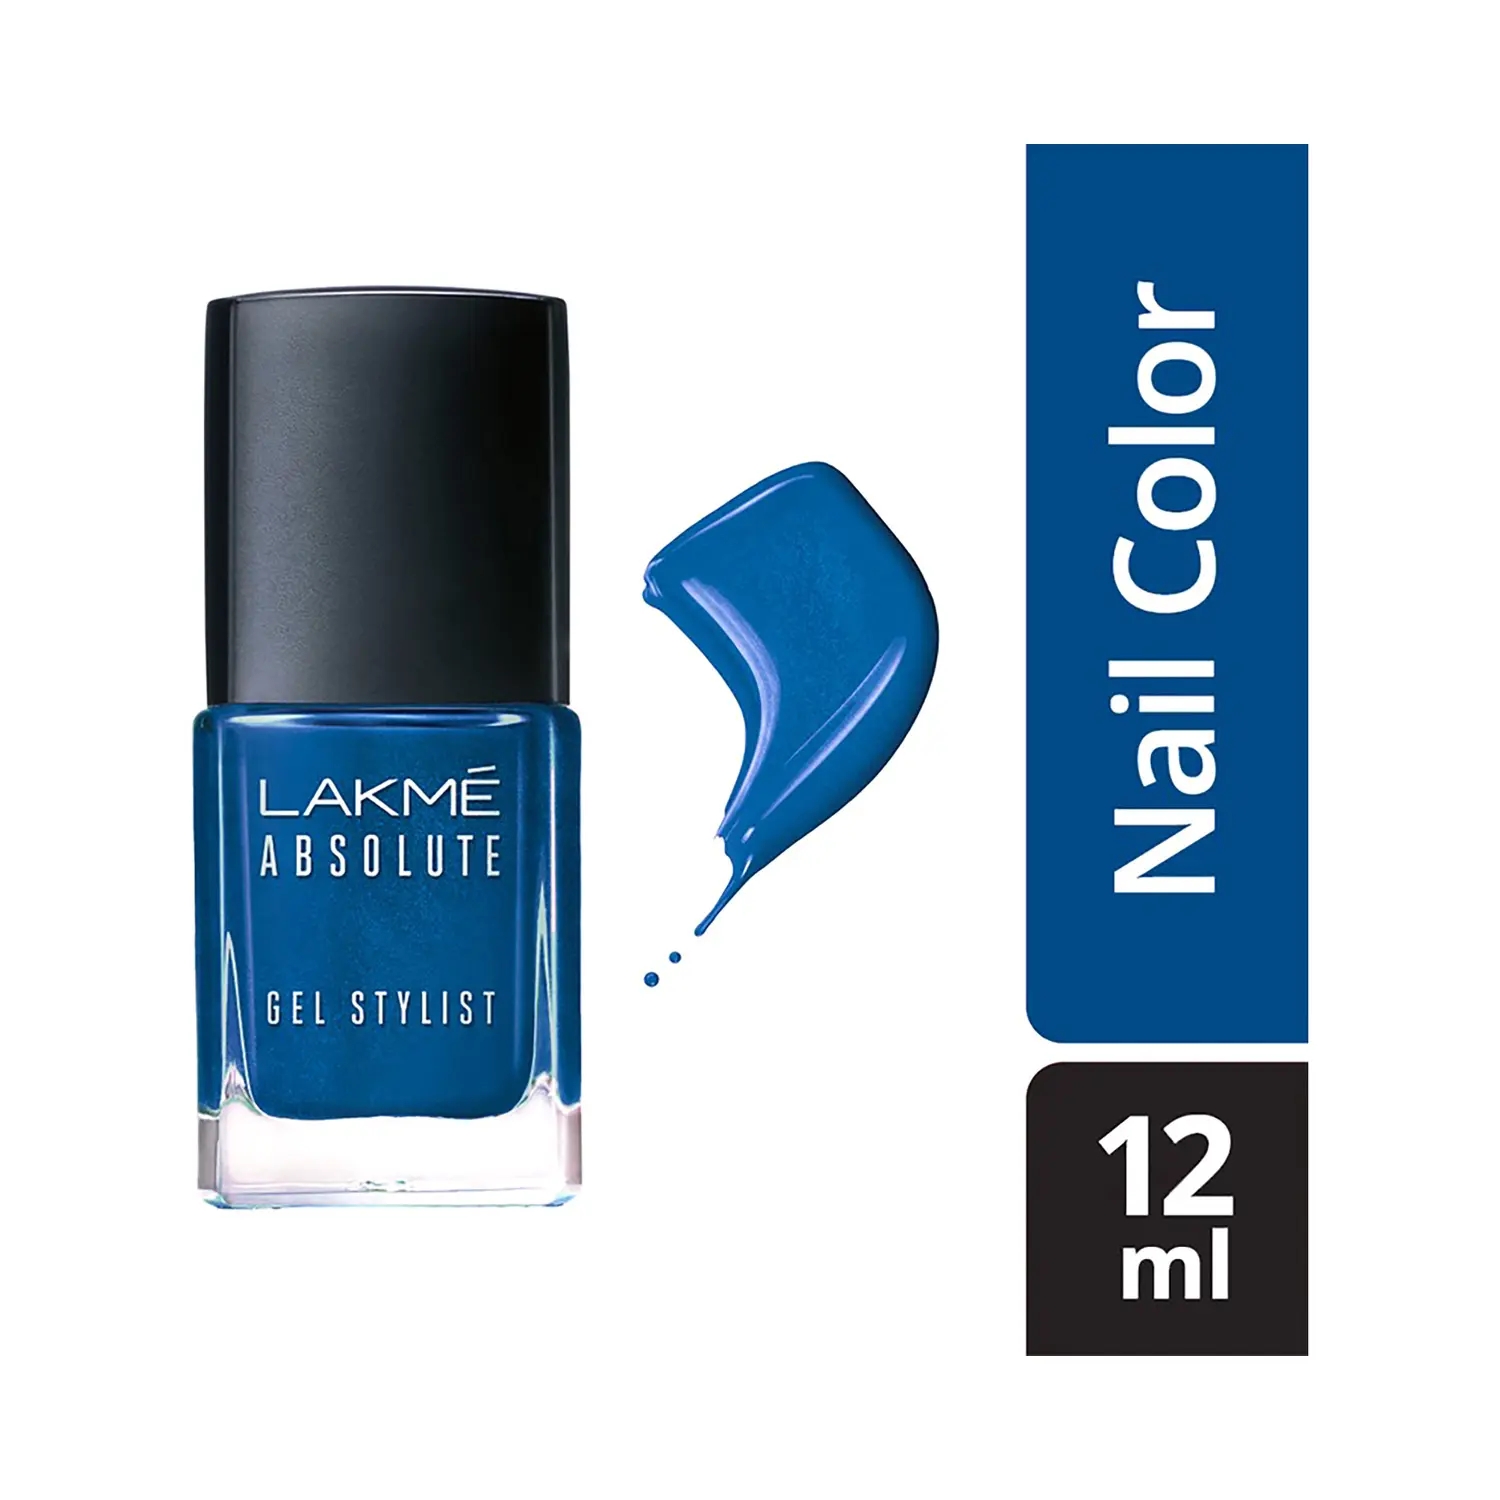 Buy Lakme Absolute - Gel Stylist Nail Colour, High Shine Formula, Glossy  Finish Online at Best Price of Rs 232.5 - bigbasket